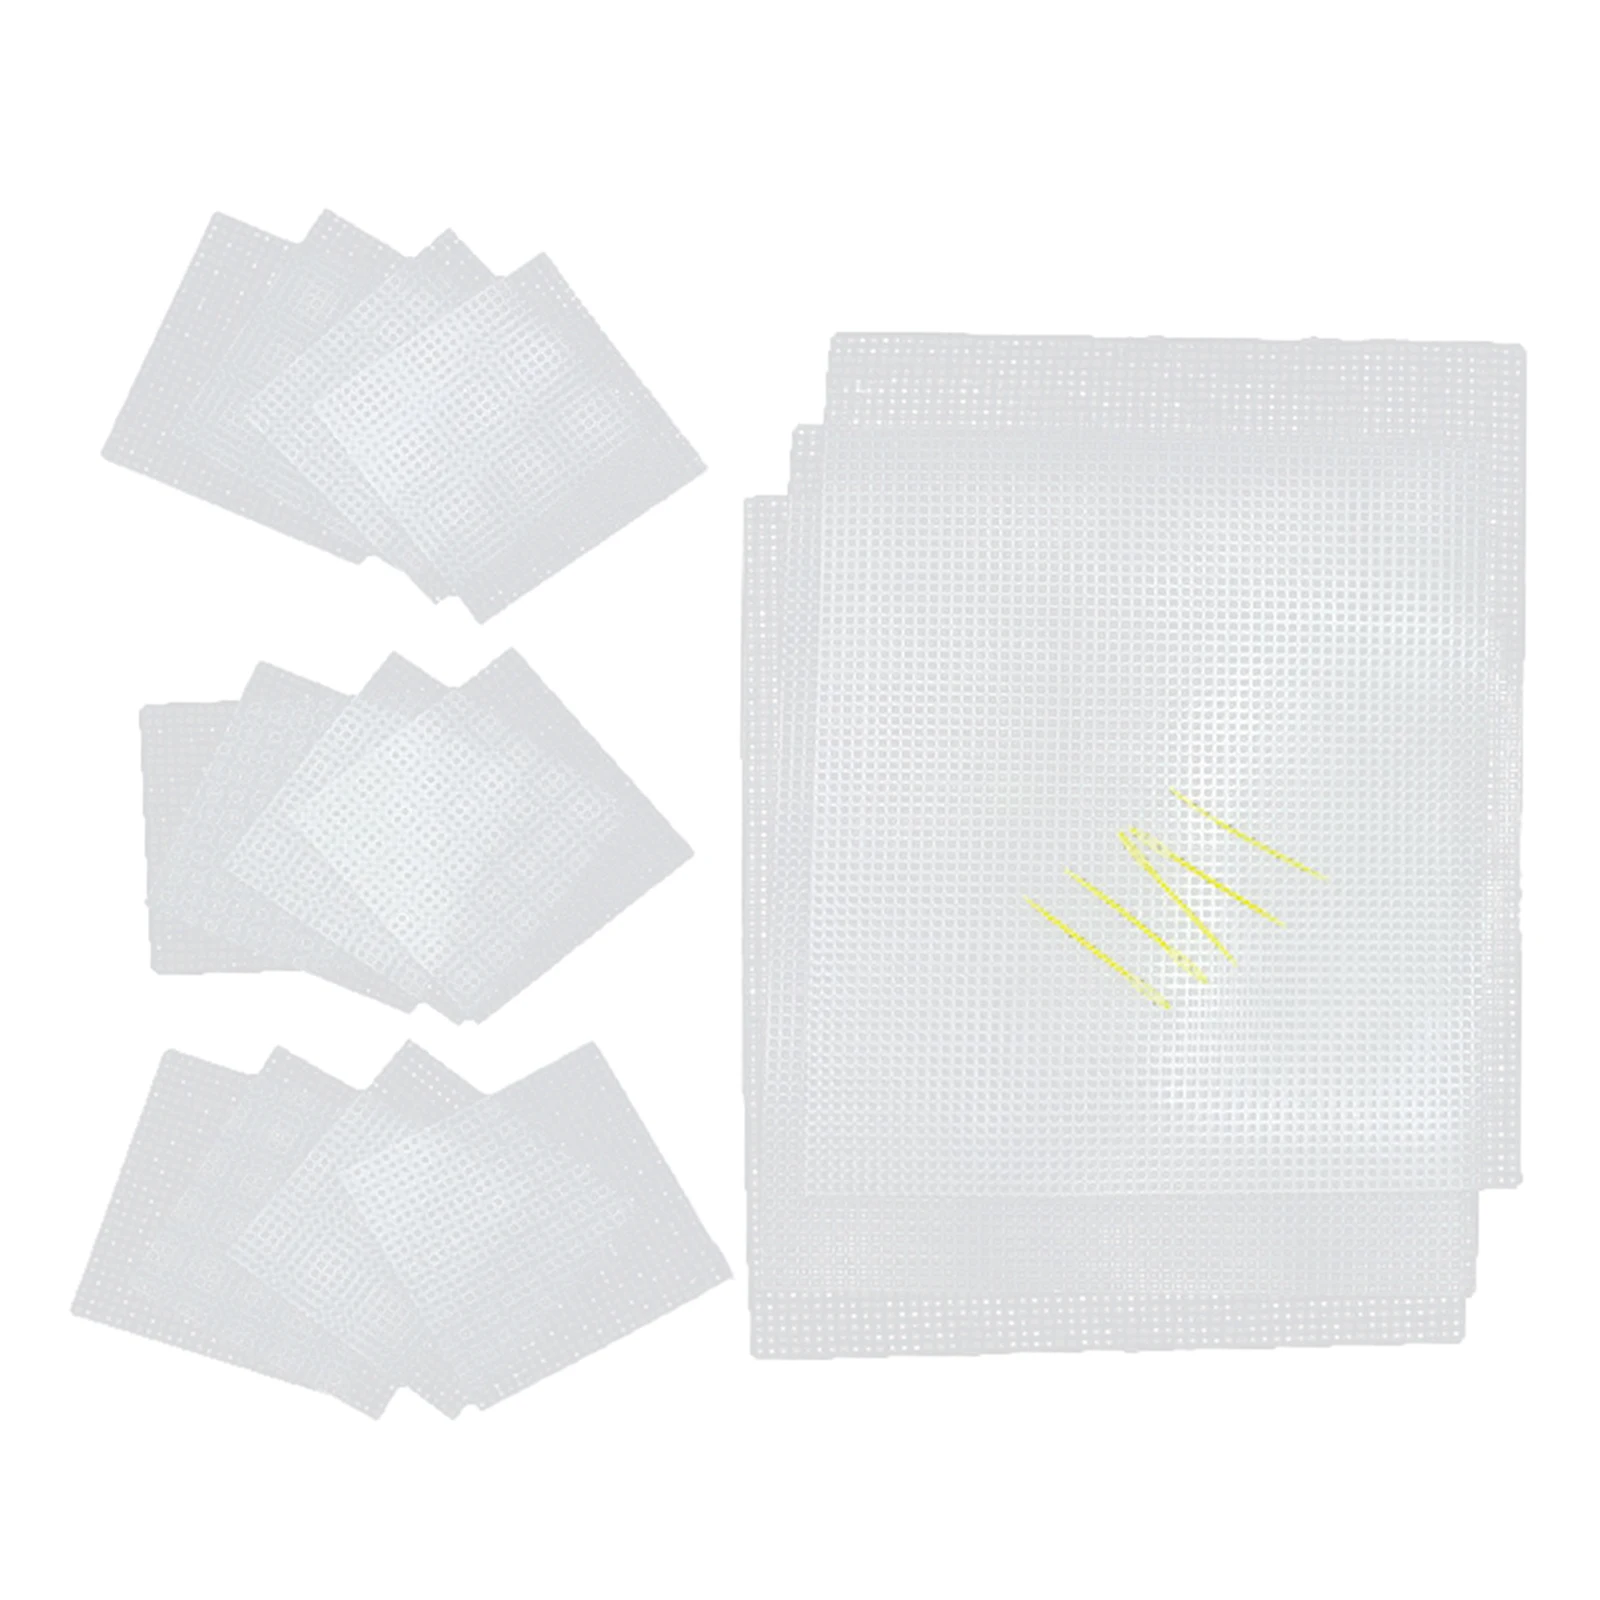 20Pcs Square Rectangle Mesh Plastic Canvas Sheets for Embroidery Crochet